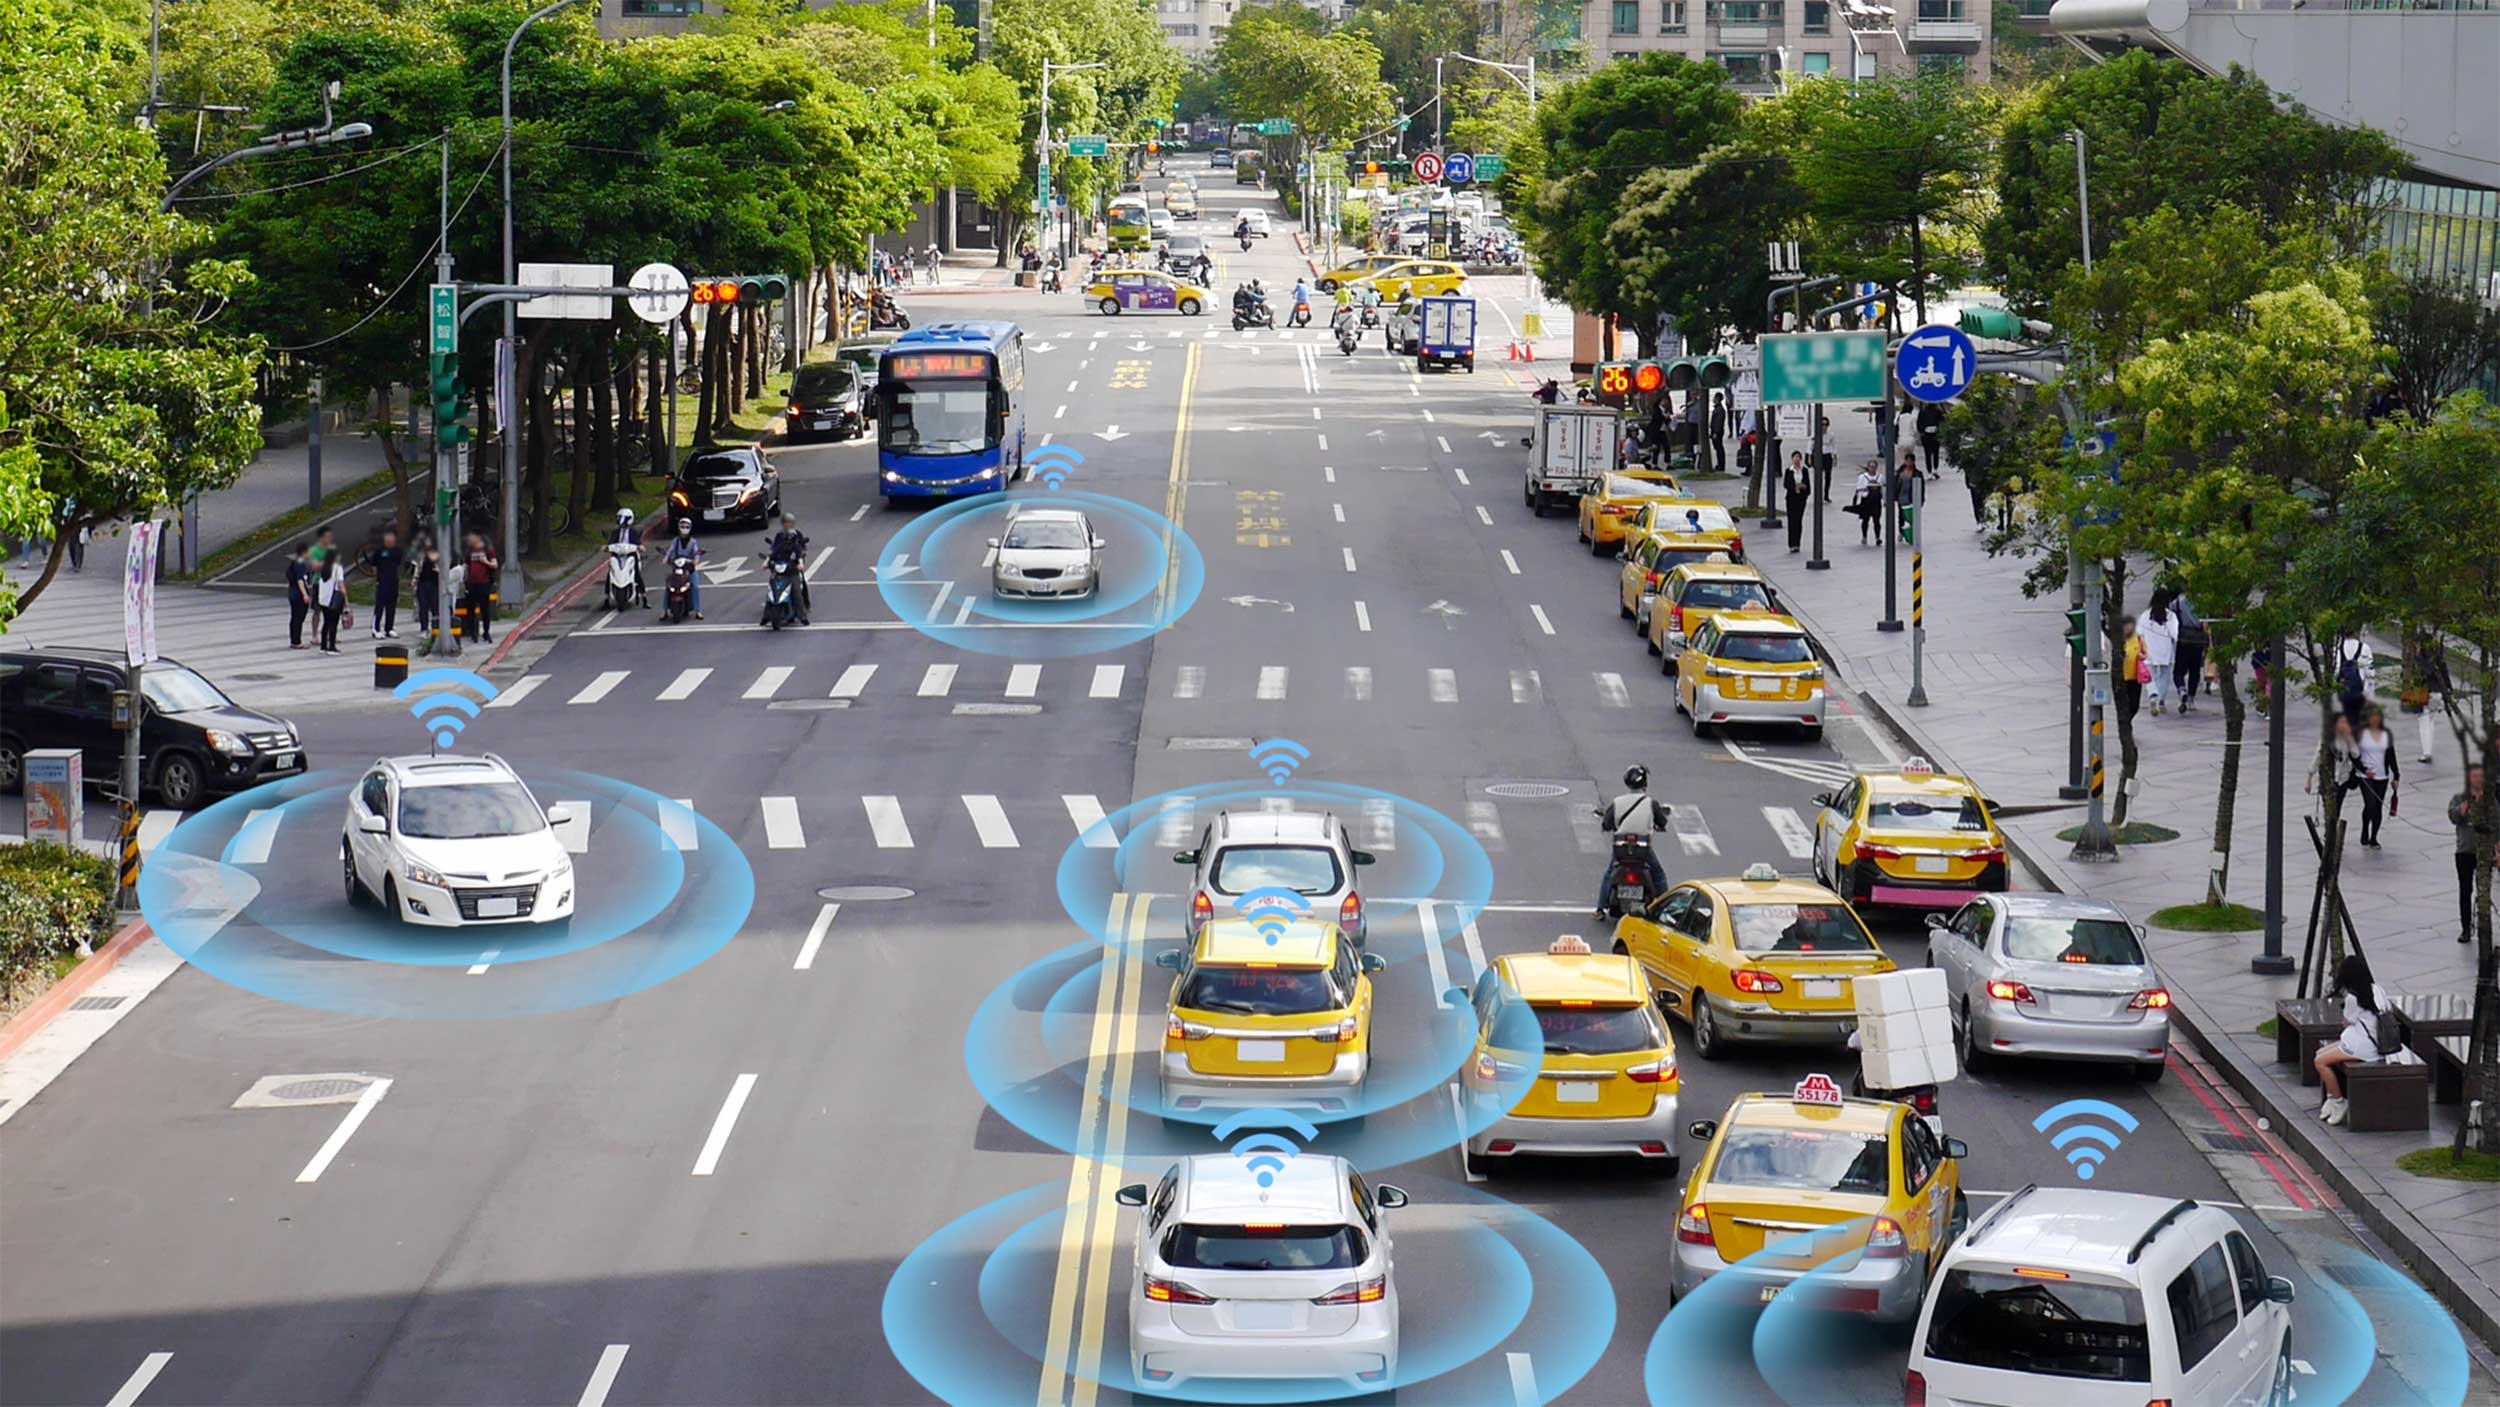 Stylized stock image of autonomous vehicles moving in city traffic